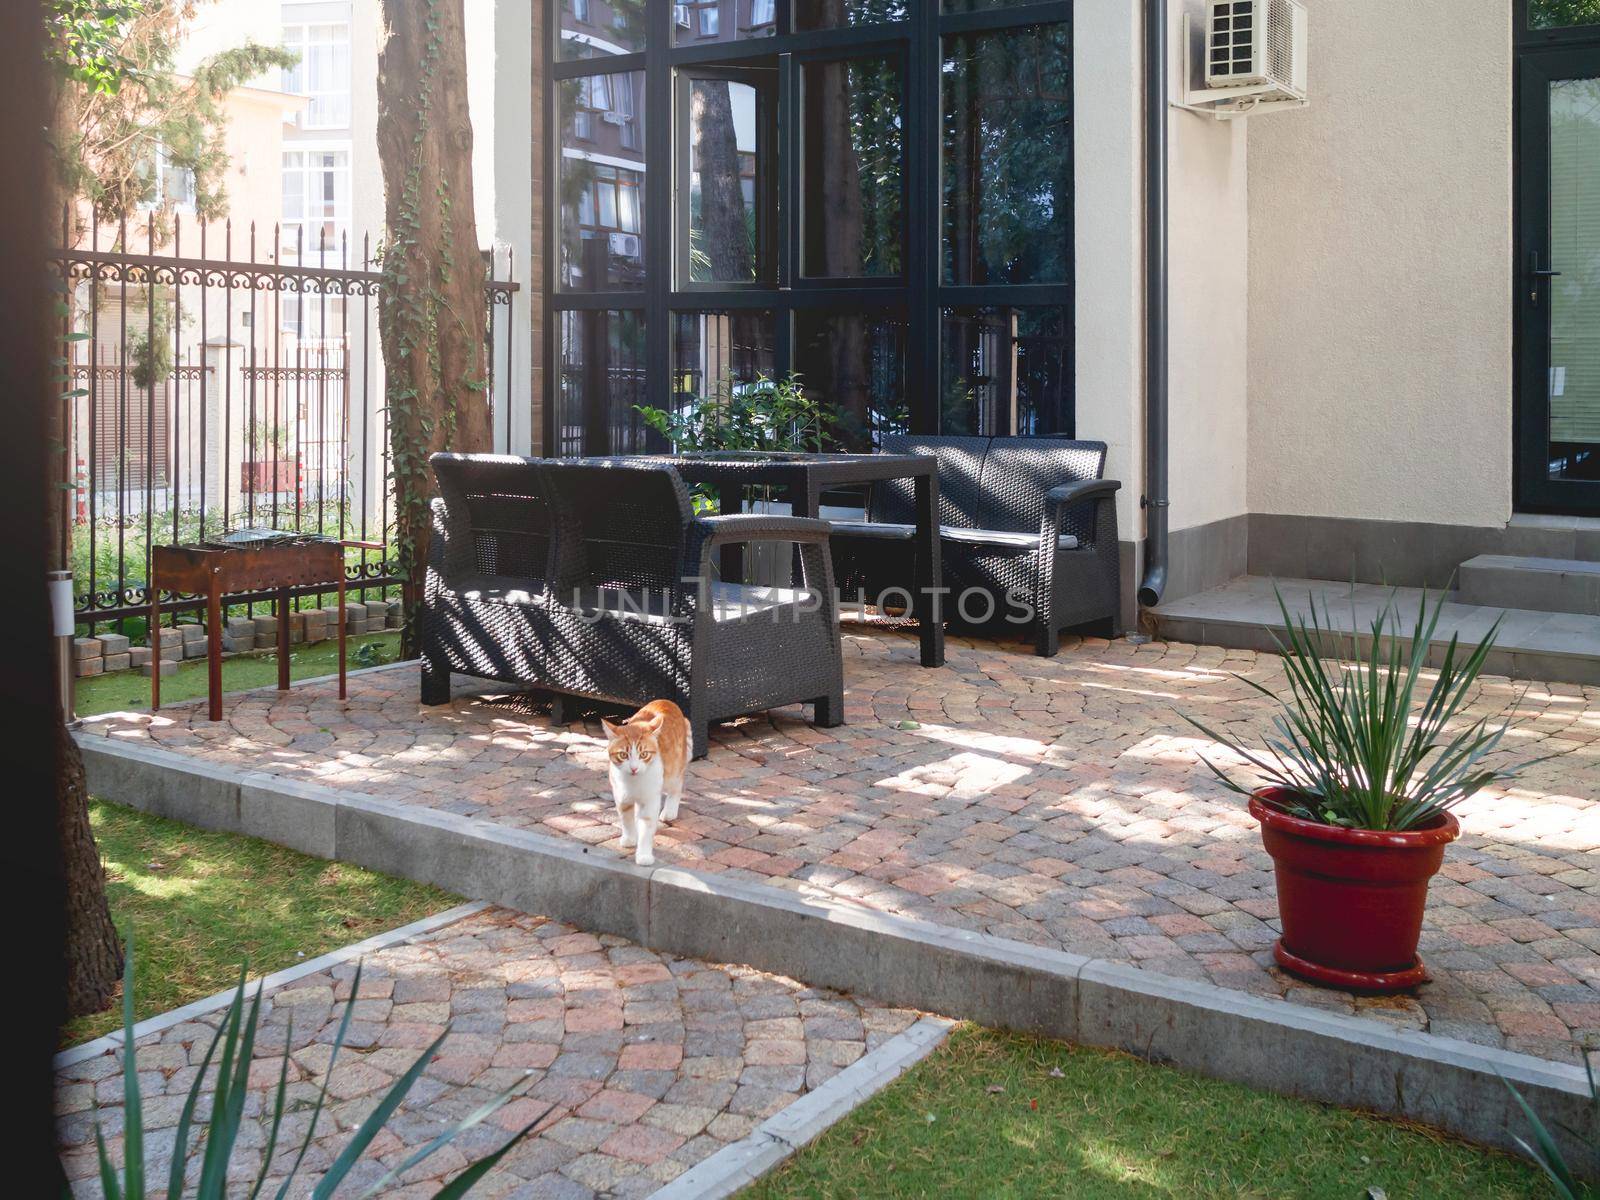 Ginger cat in patio. Fluffy pet on courtyard - outdoor place for party and BBQ. Residential district.